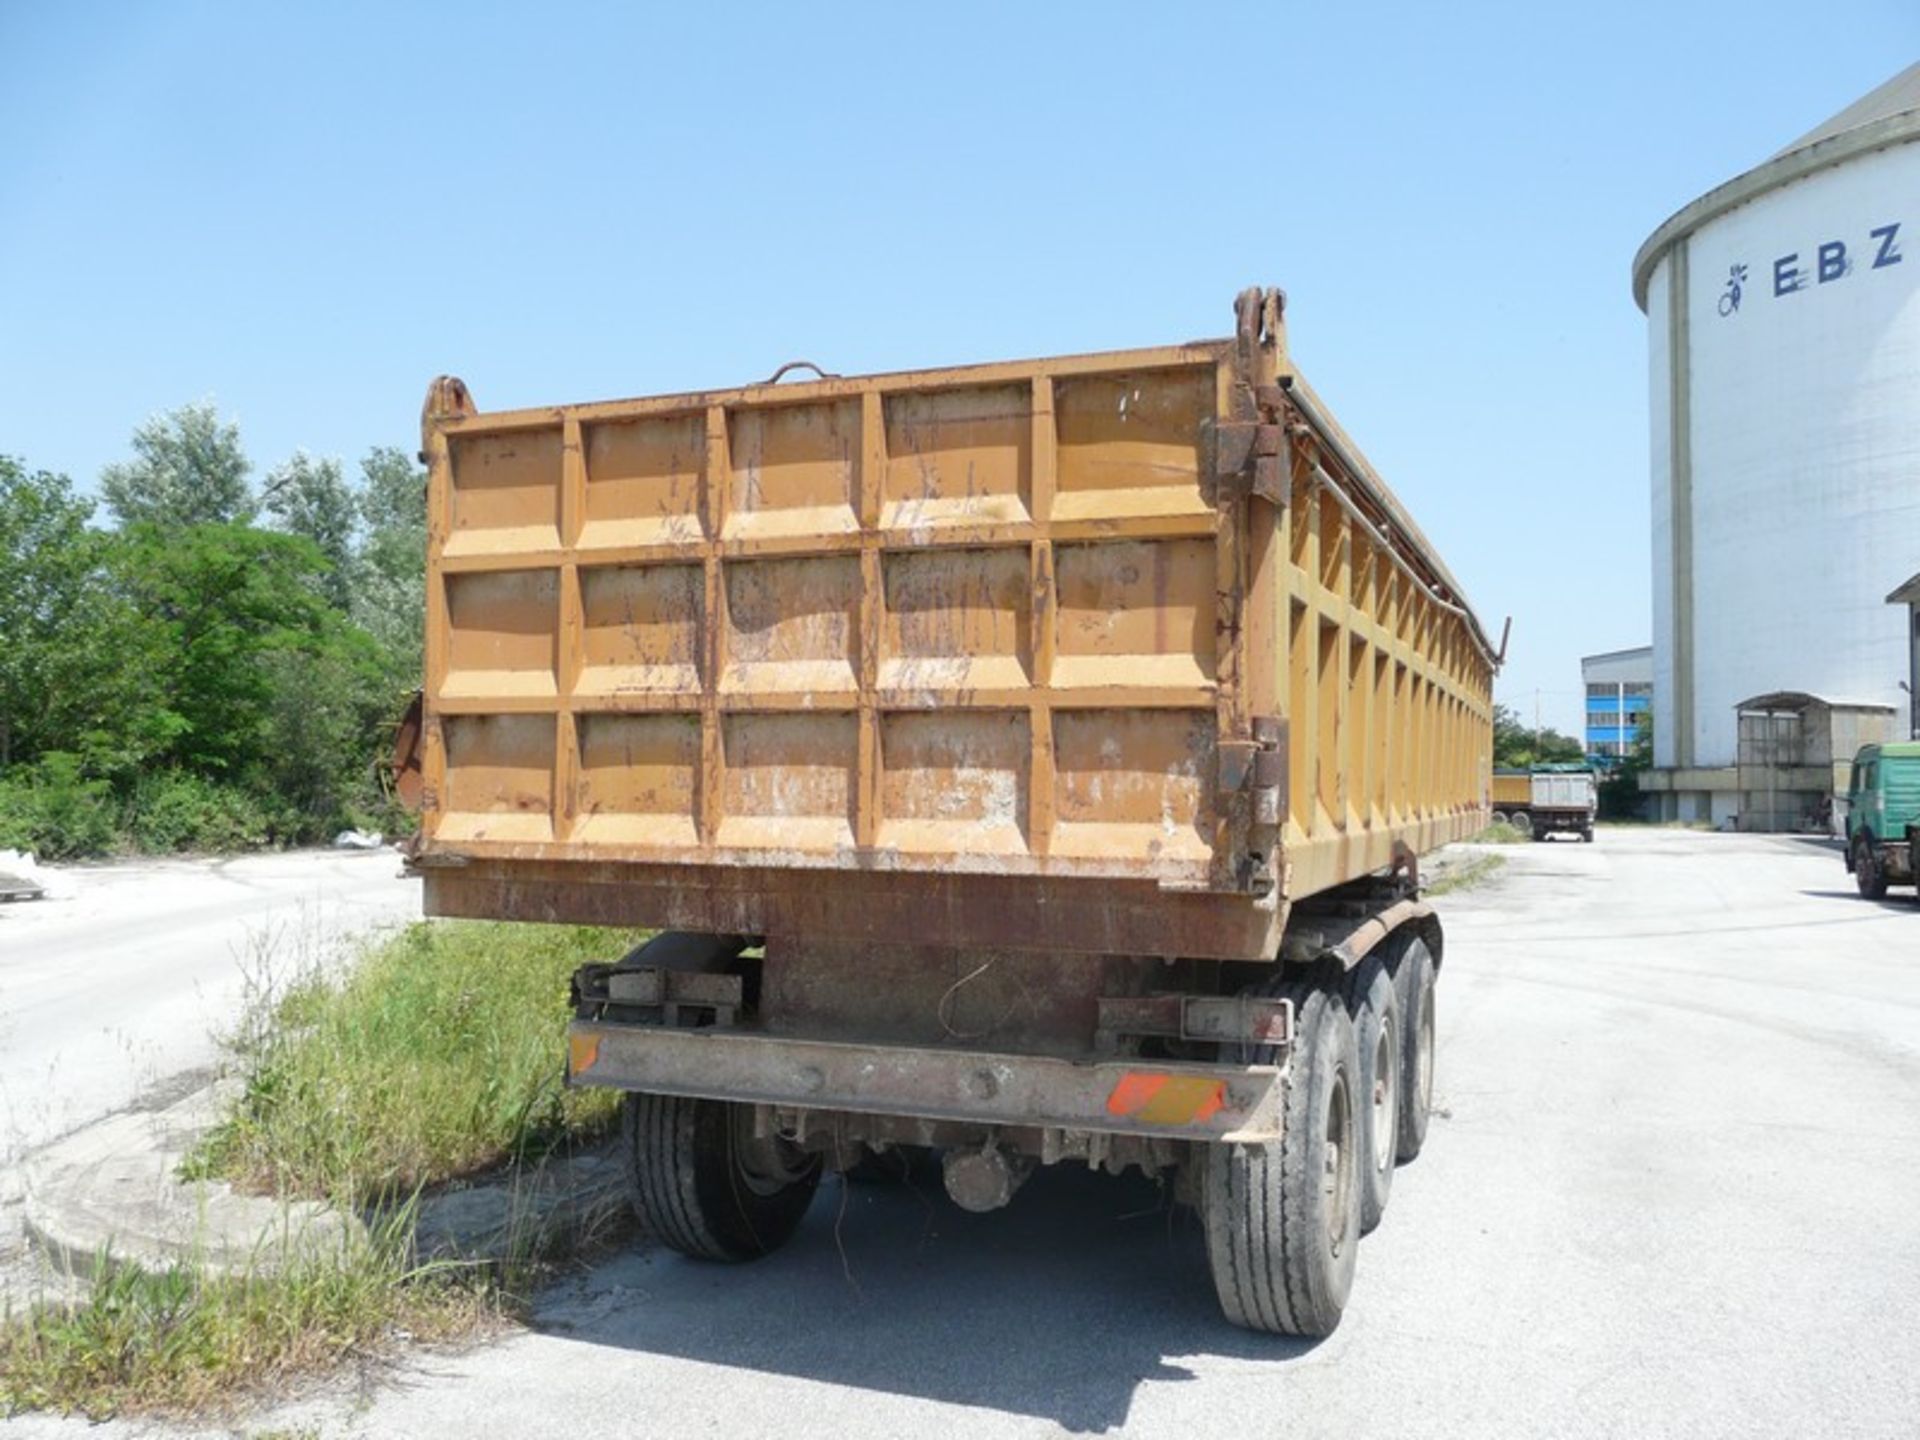 3 AXILE BACK LIFT FOR OFF LOADING GRAVEL WITH SYSTEM TO COVER BACK PART (Located in Greece - Plati - Bild 4 aus 5